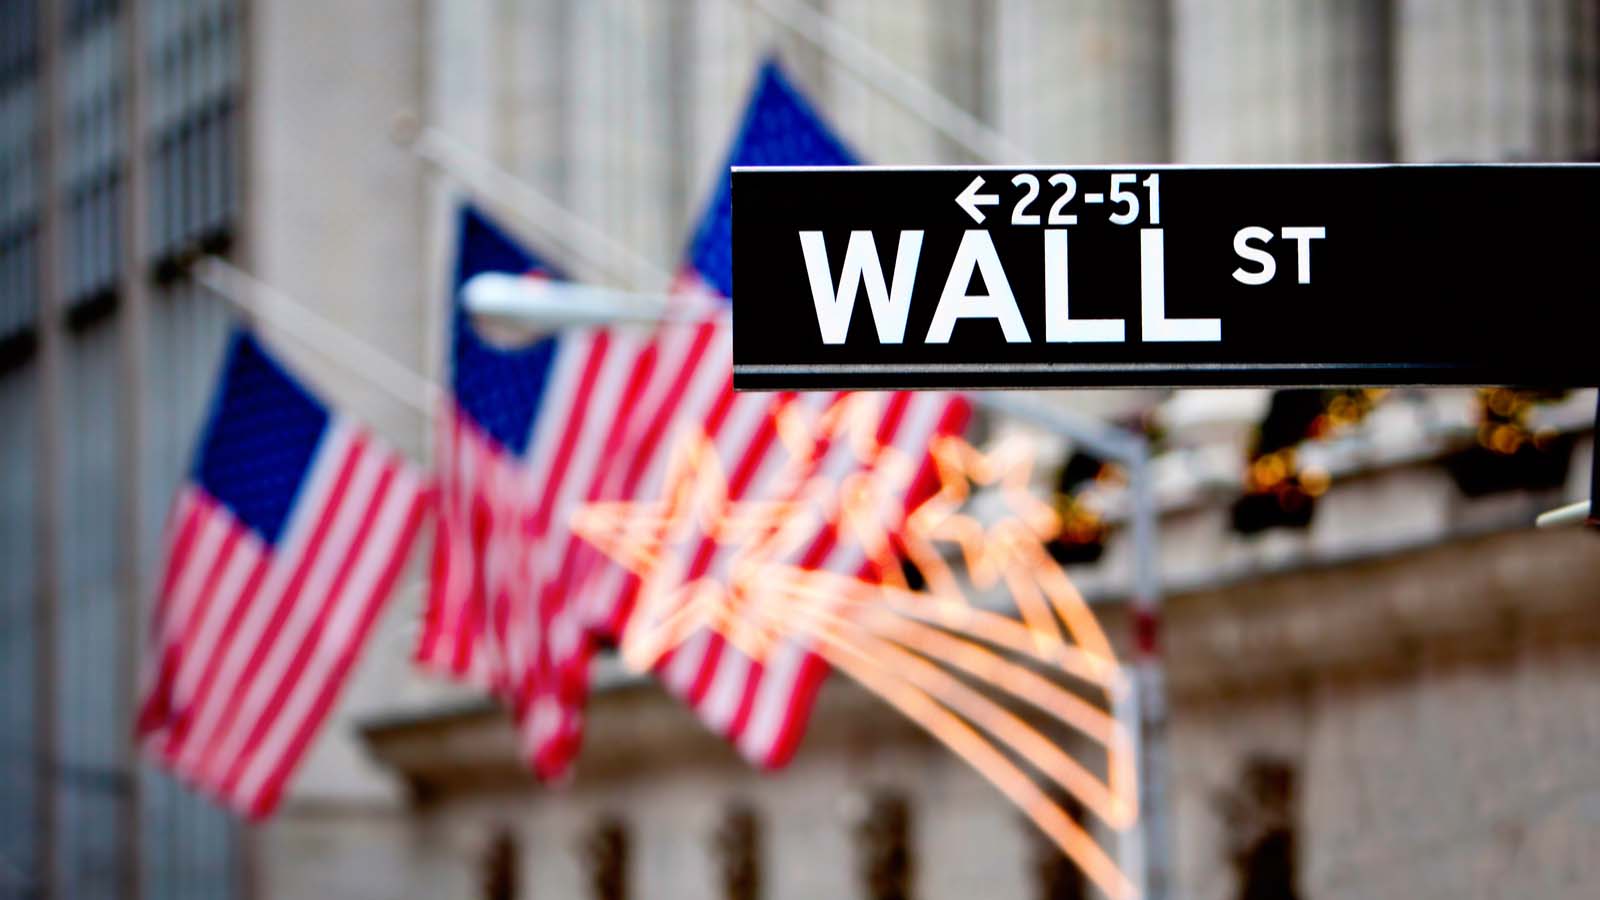 3 Undervalued Dow Stocks to Buy Before Wall Street Does